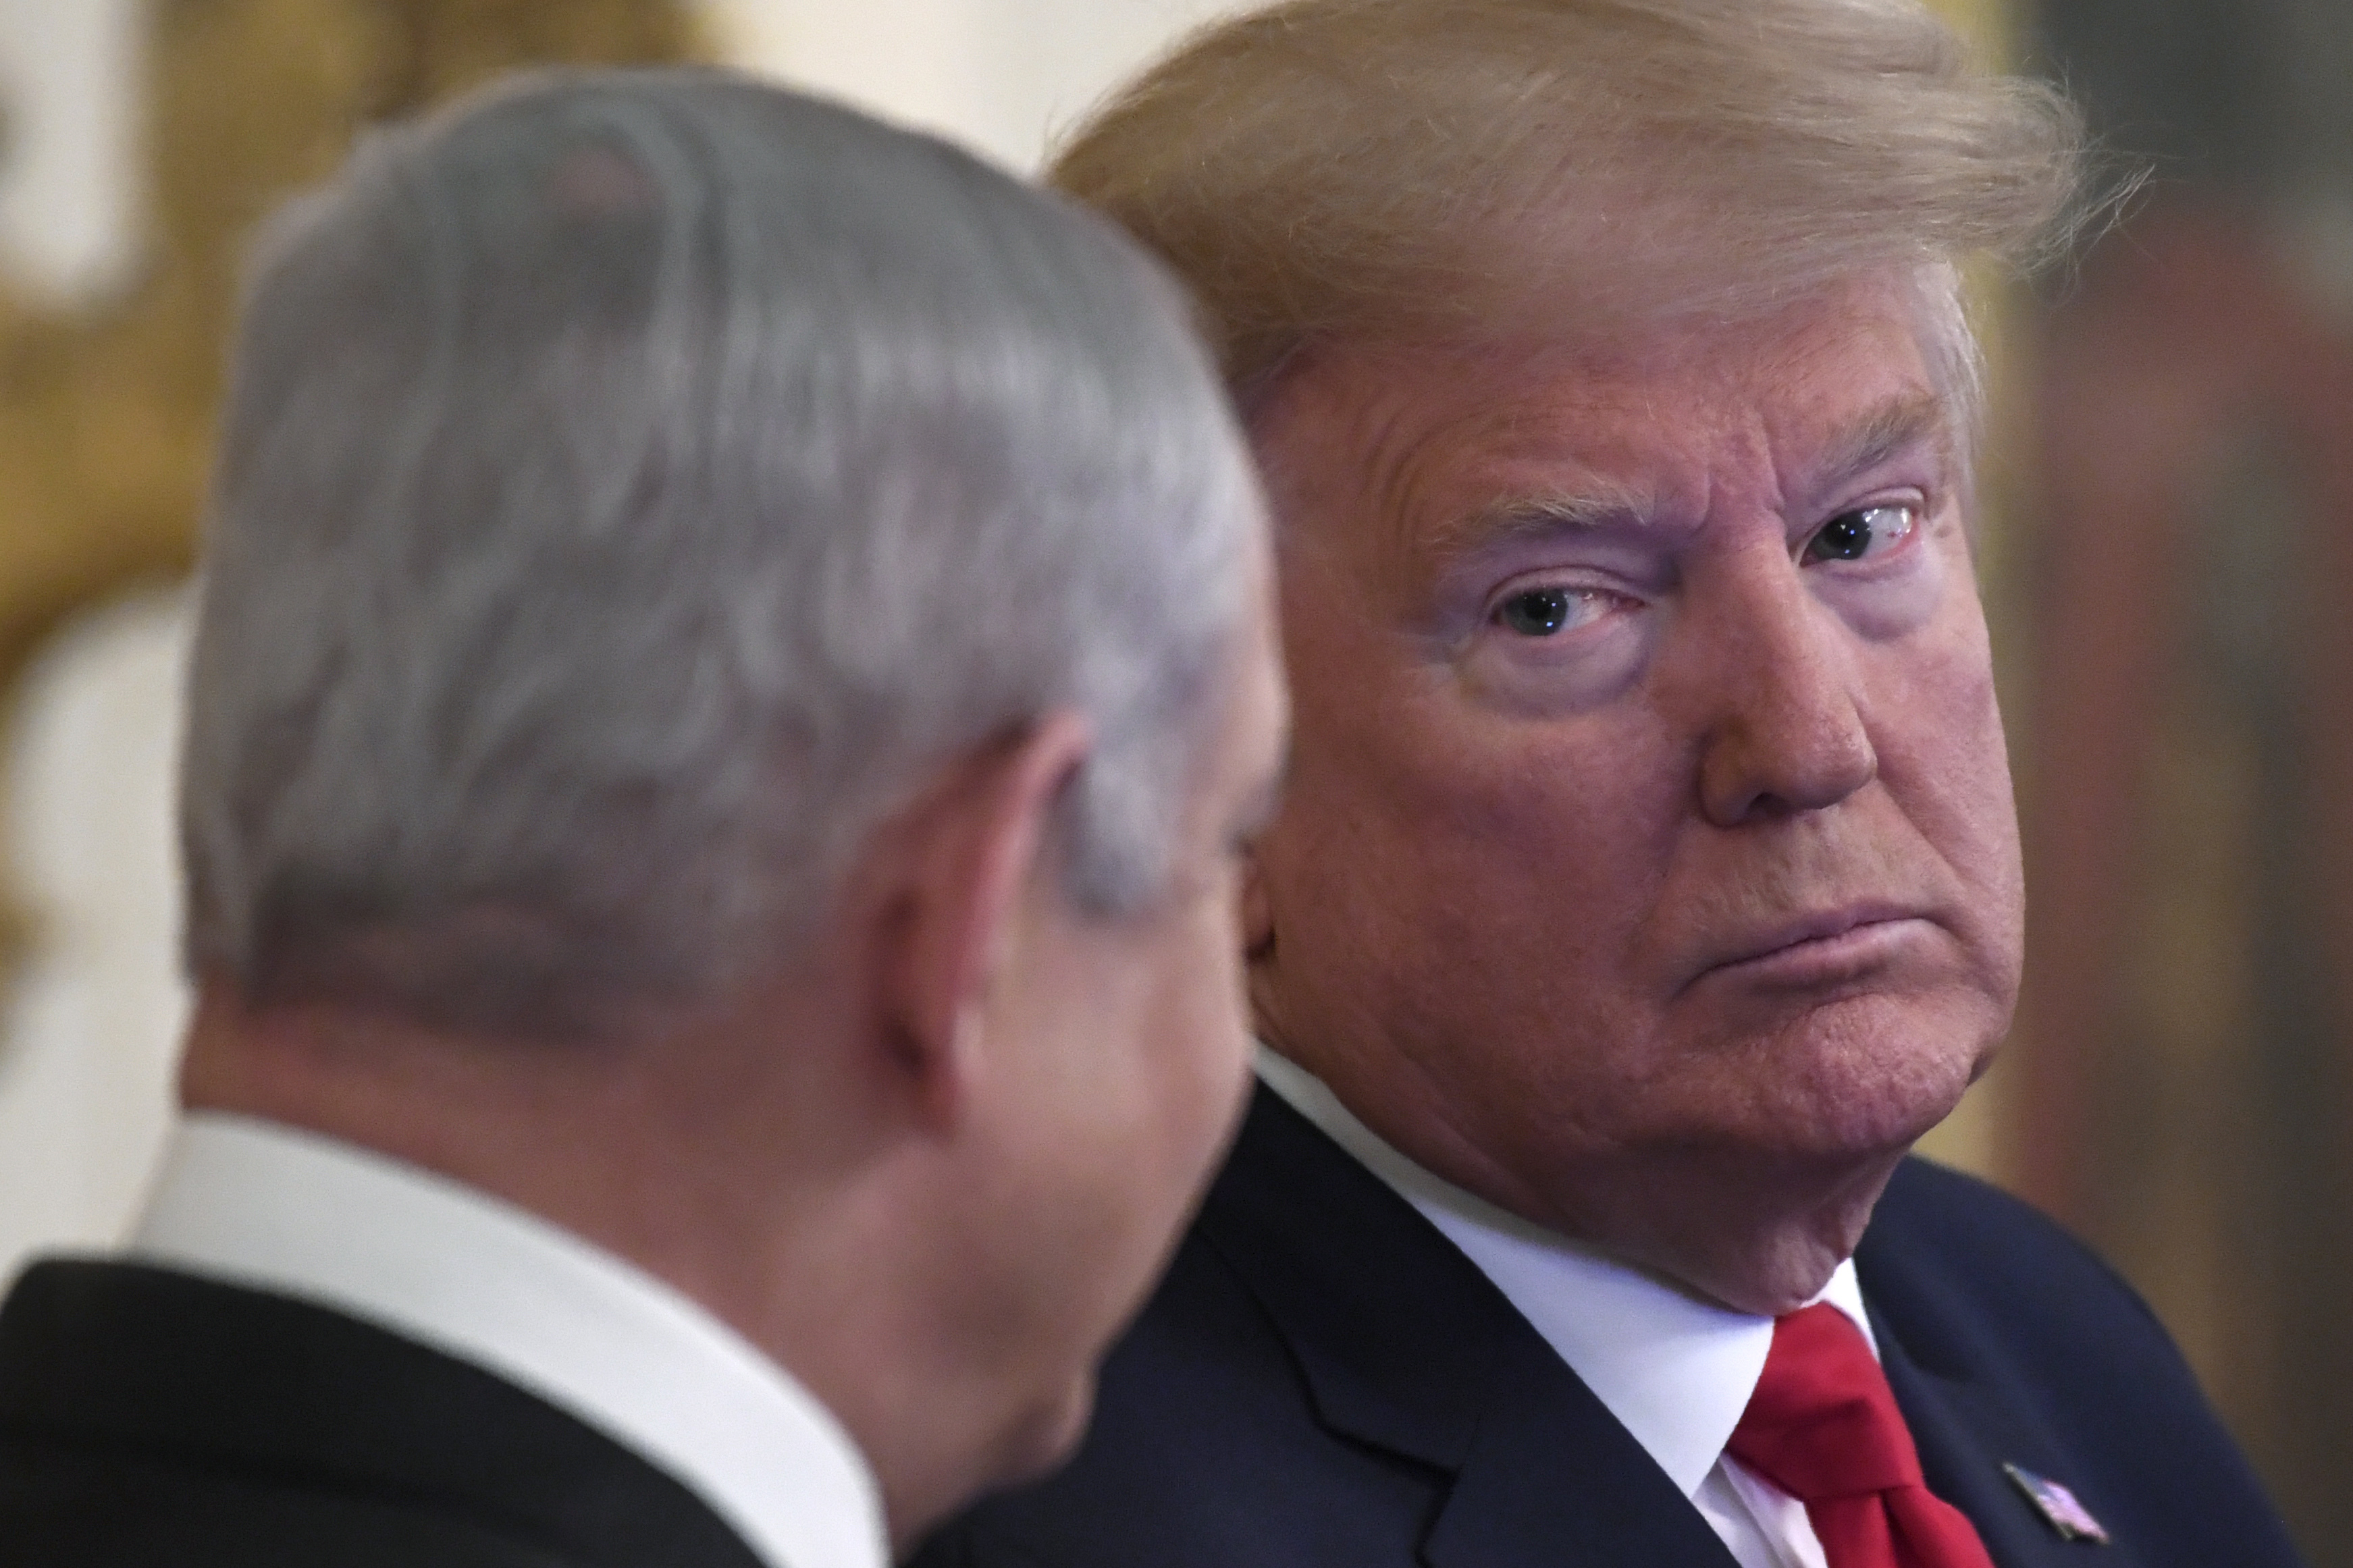 President Donald Trump, right, looks over to Israeli Prime Minister Benjamin Netanyahu, left, during an event in the East Room of the White House in Washington, Tuesday, Jan. 28, 2020, to announce the Trump administration's much-anticipated plan to resolve the Israeli-Palestinian conflict. (AP Photo/Susan Walsh)